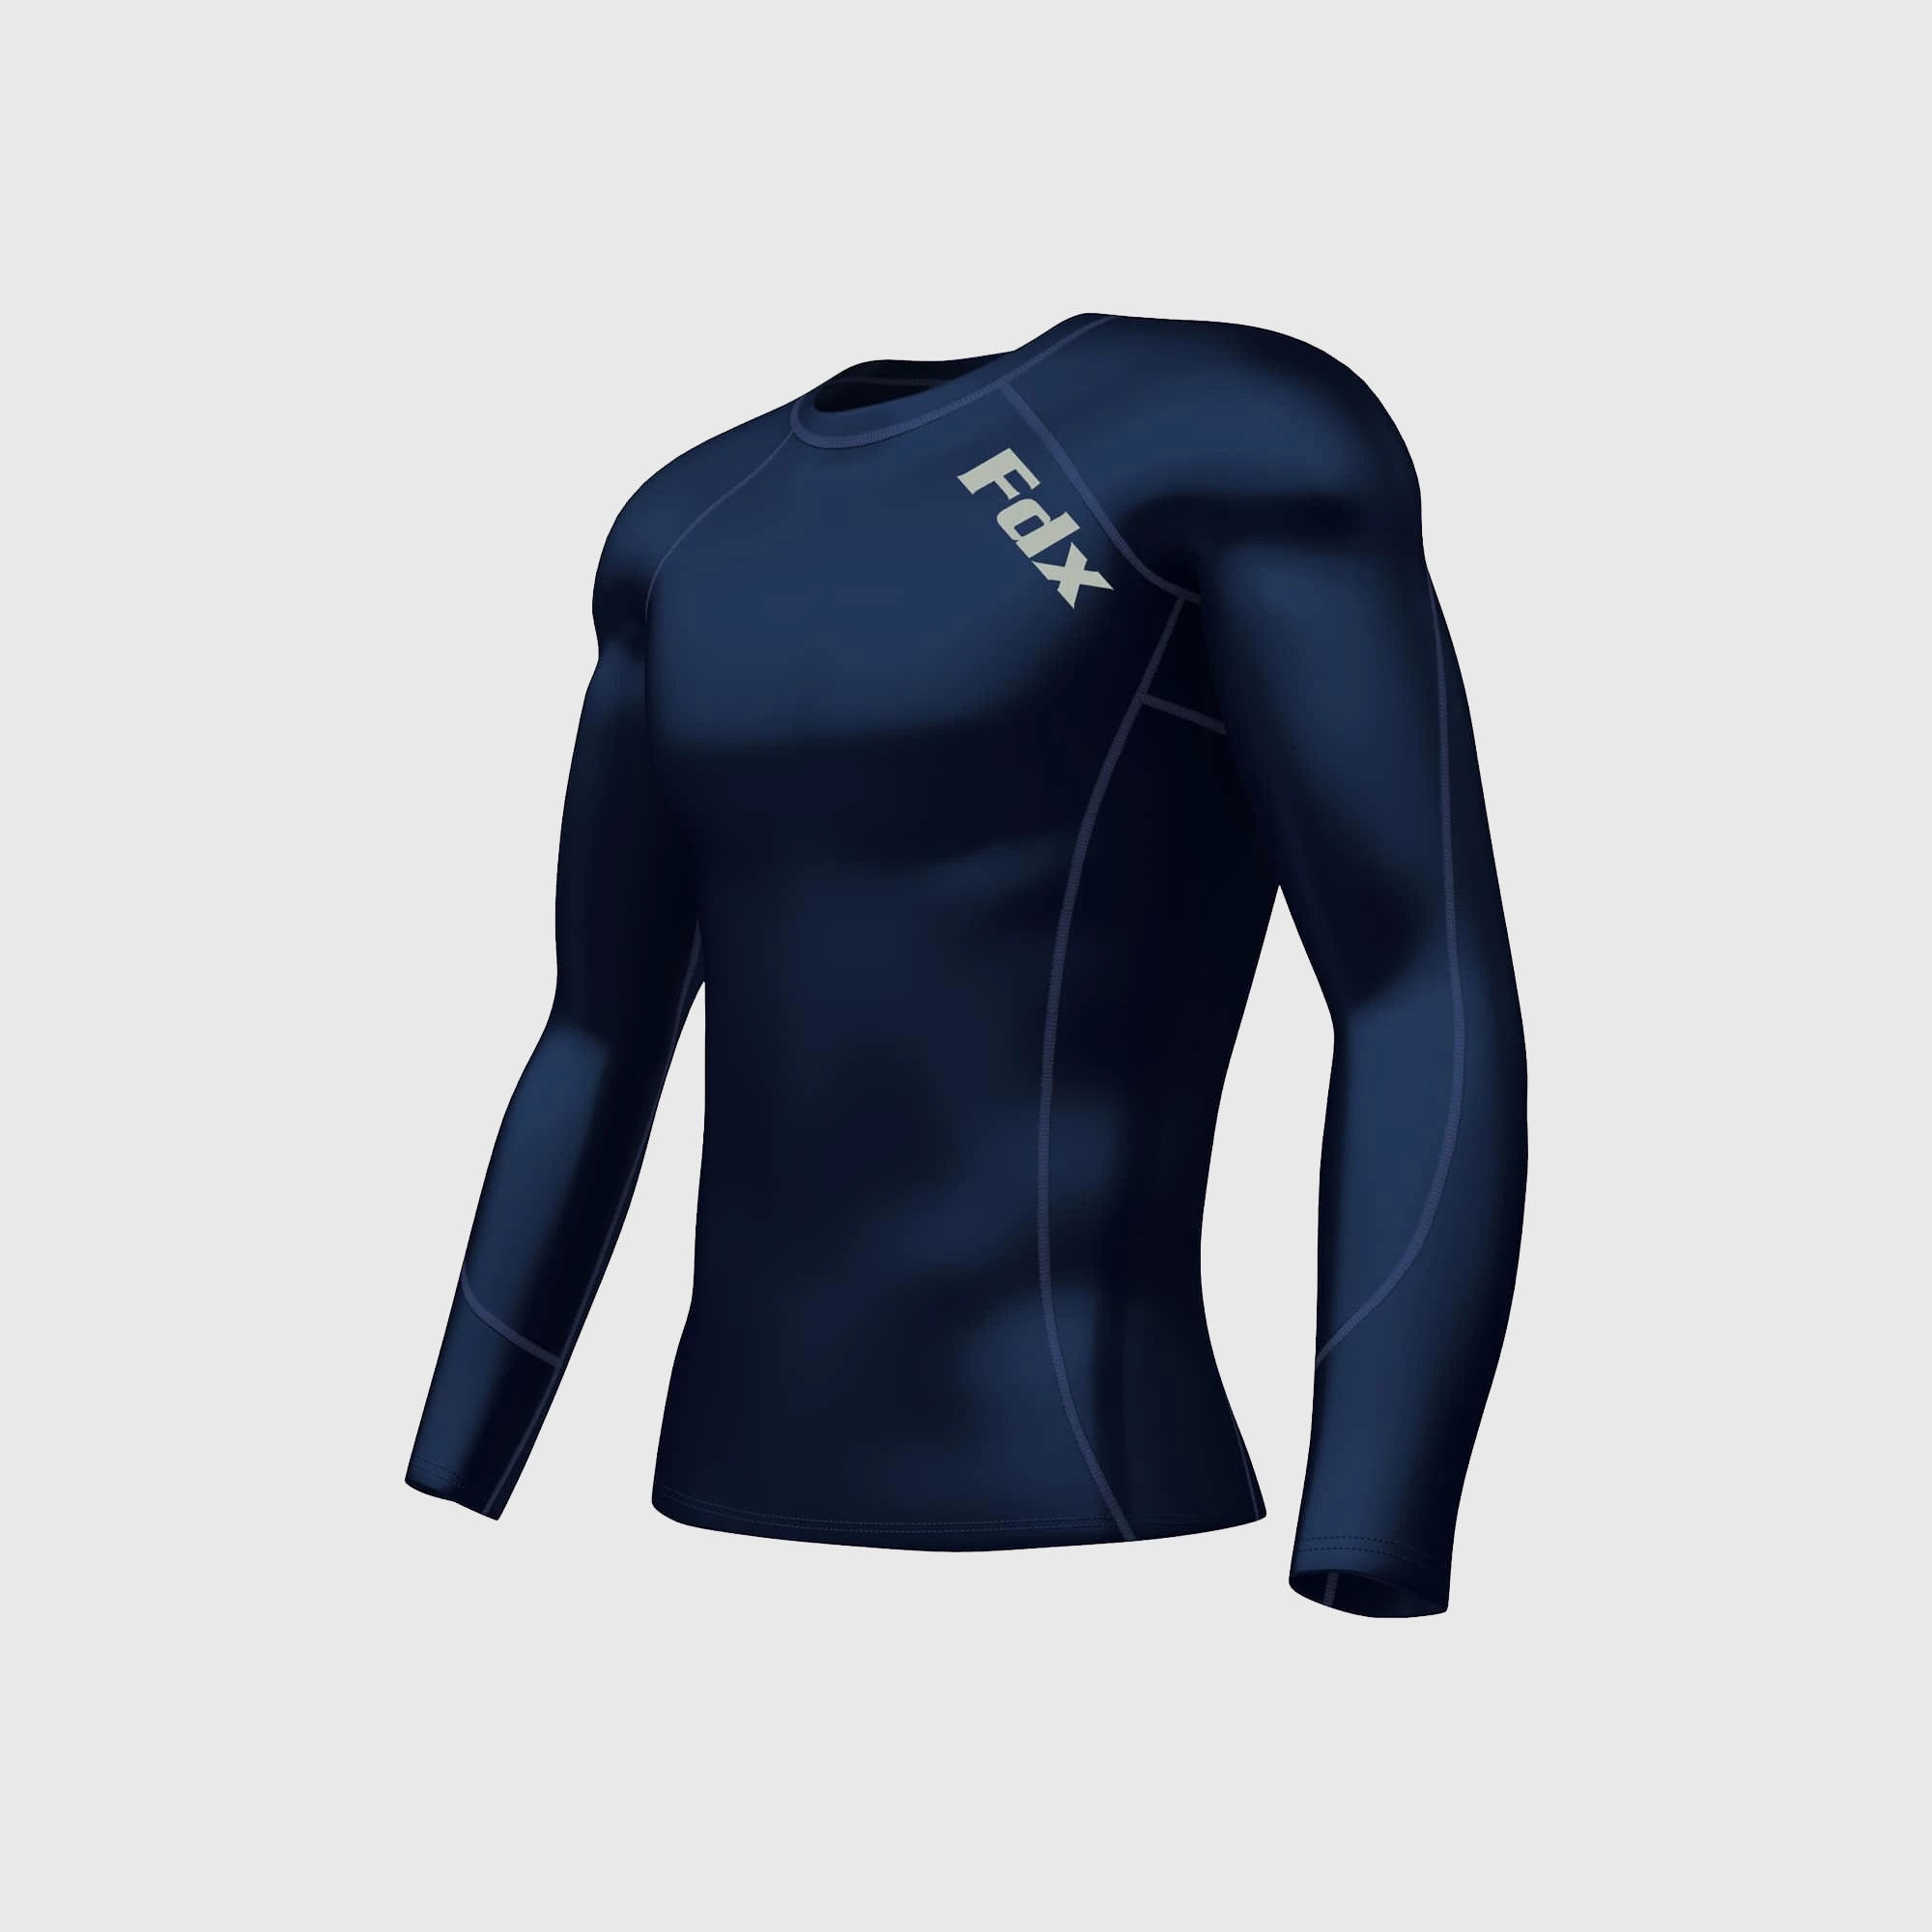 Fdx Mens Navy Blue Long Sleeve Compression Top Running Gym Workout Wear Rash Guard Stretchable Breathable - Thermolinx